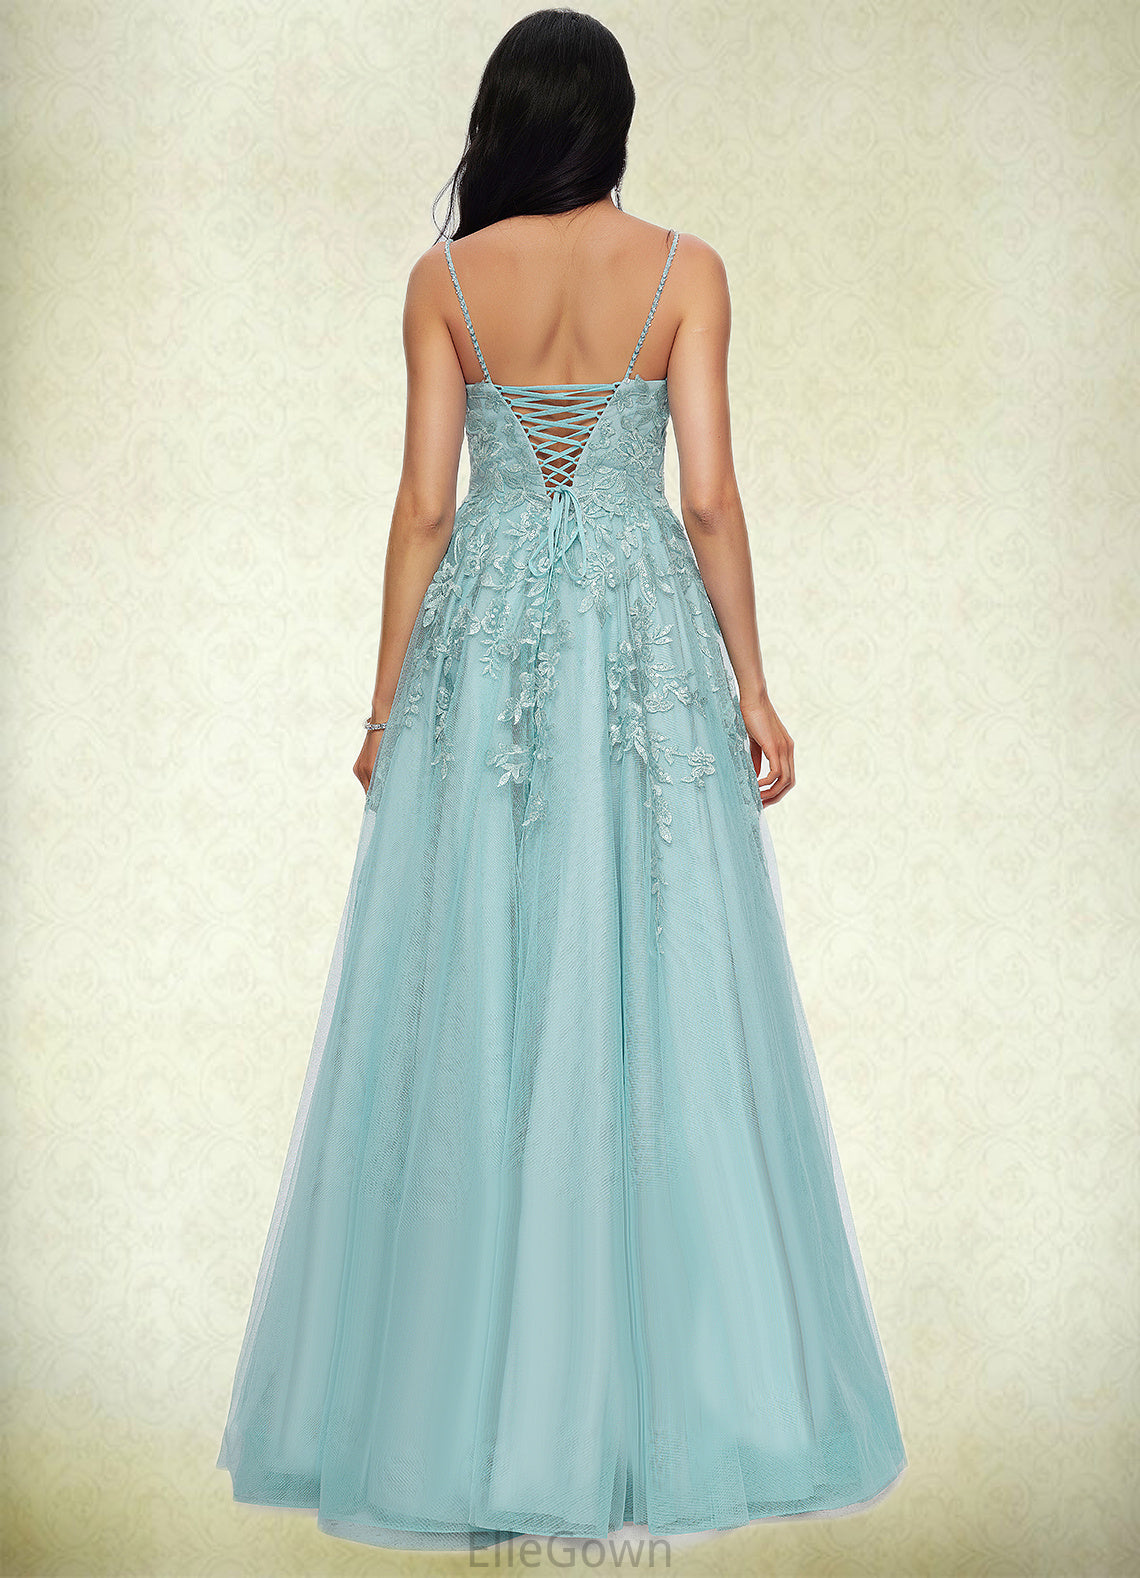 Jordin Ball-Gown/Princess Straight Floor-Length Tulle Prom Dresses With Appliques Lace Sequins DEP0022206